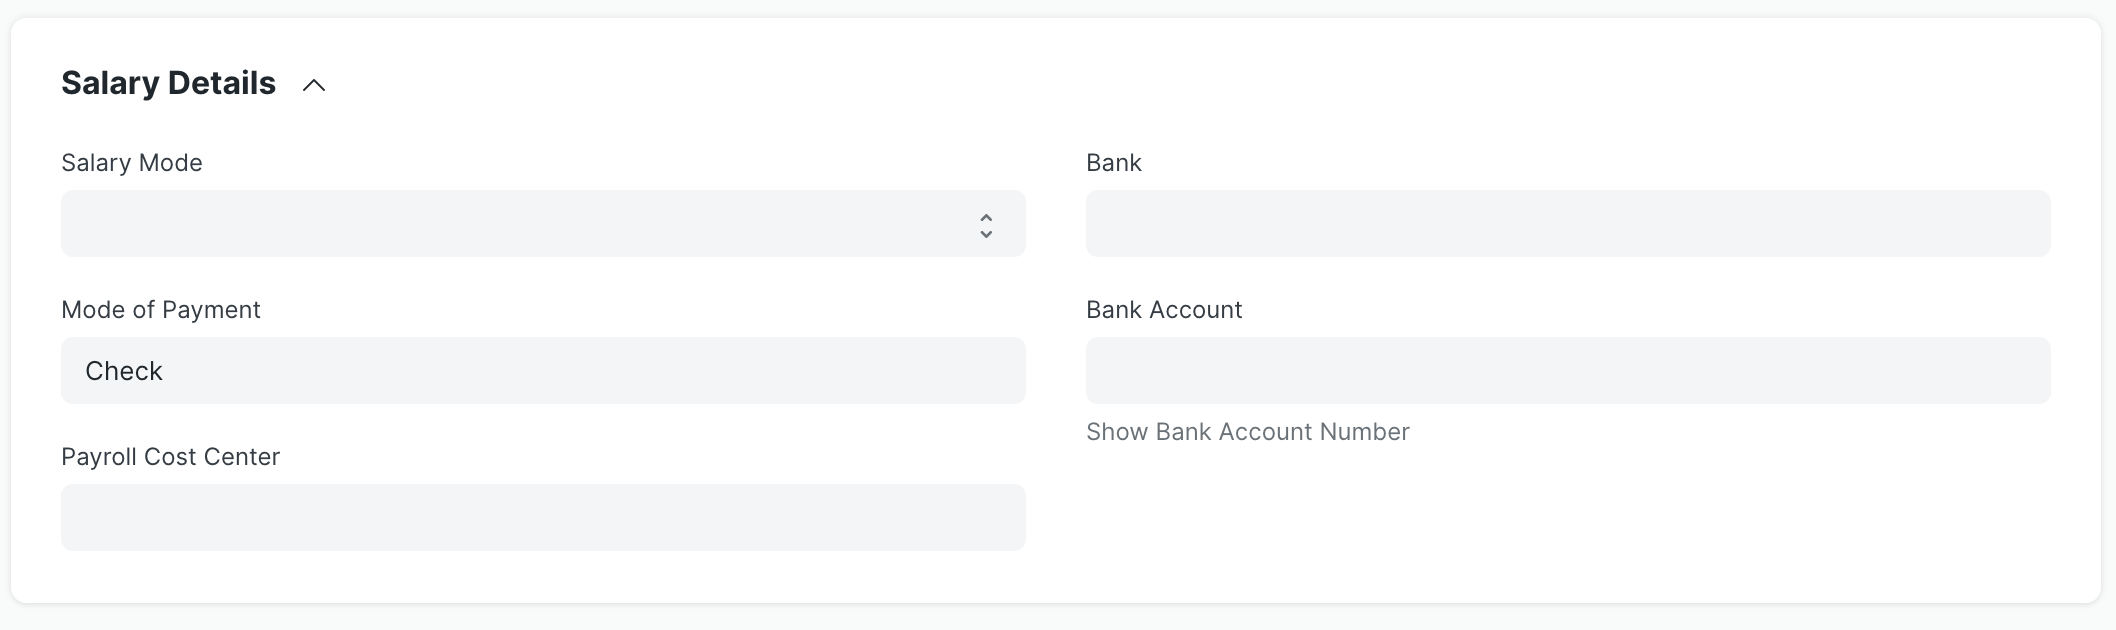 Employee doctype detail showing the expanded Salary Details section with new fields for Mode of Payment, Bank, and Bank Account.